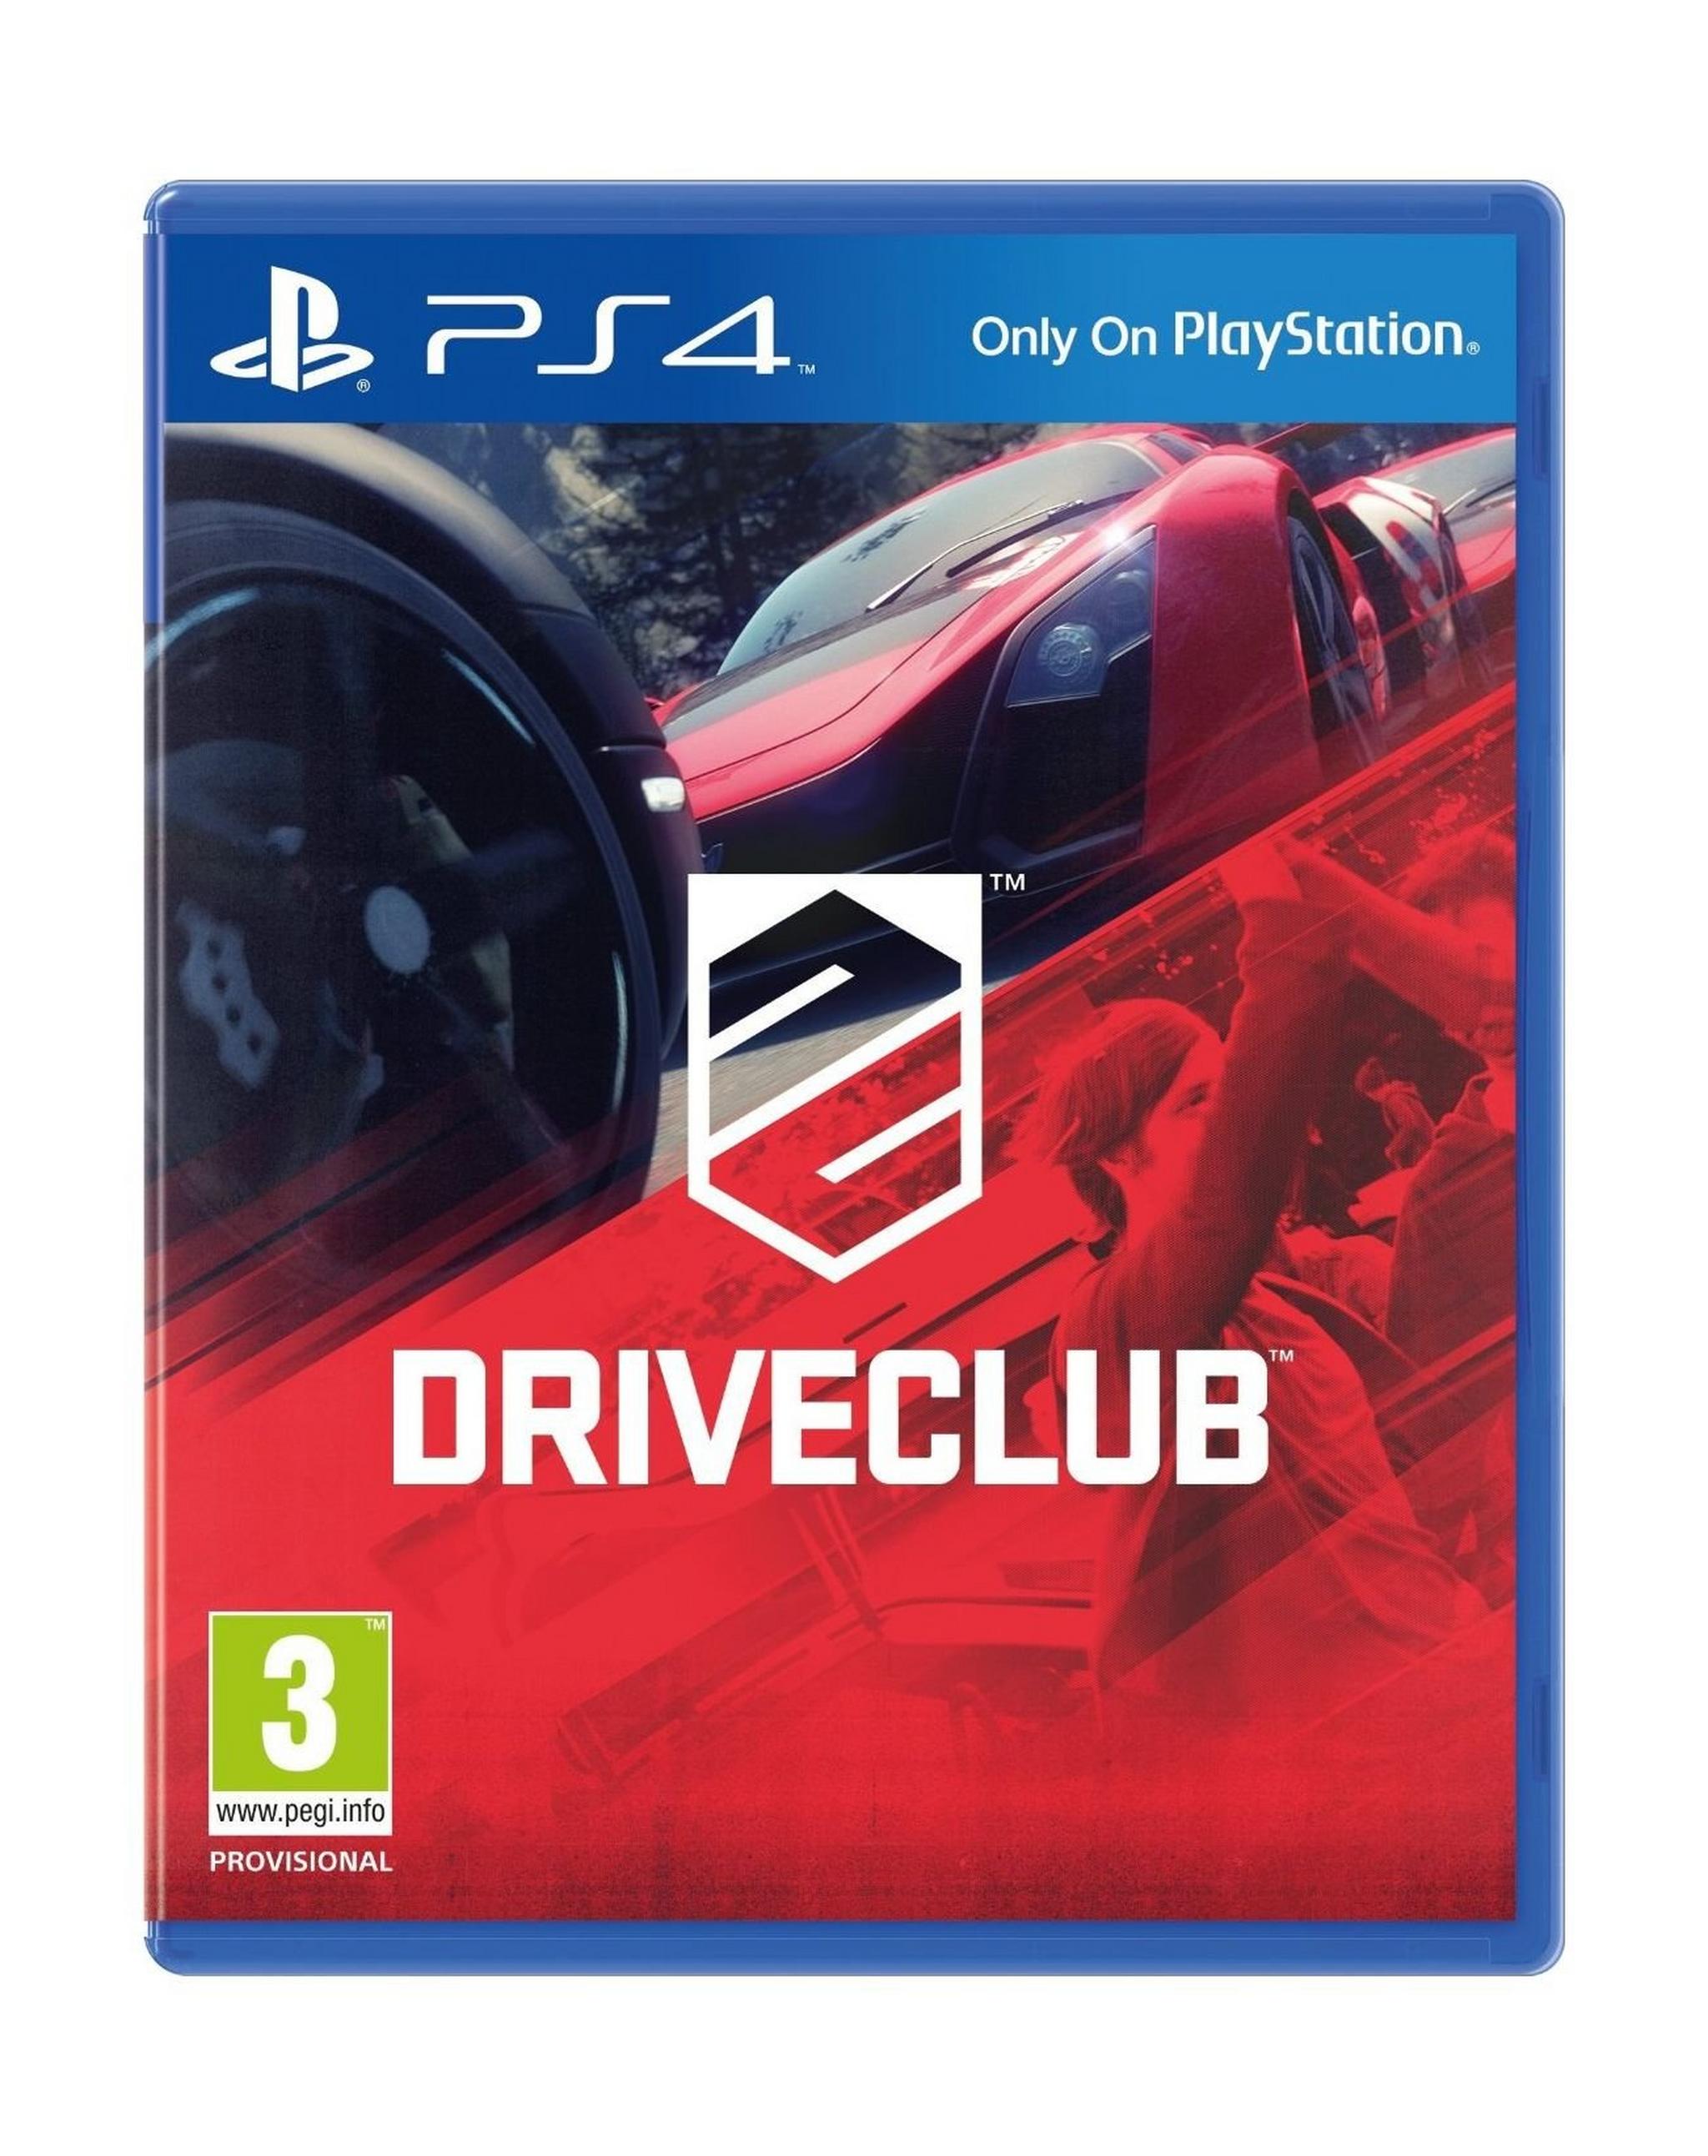 DriveClub - PS4 Game (Standard Edition)